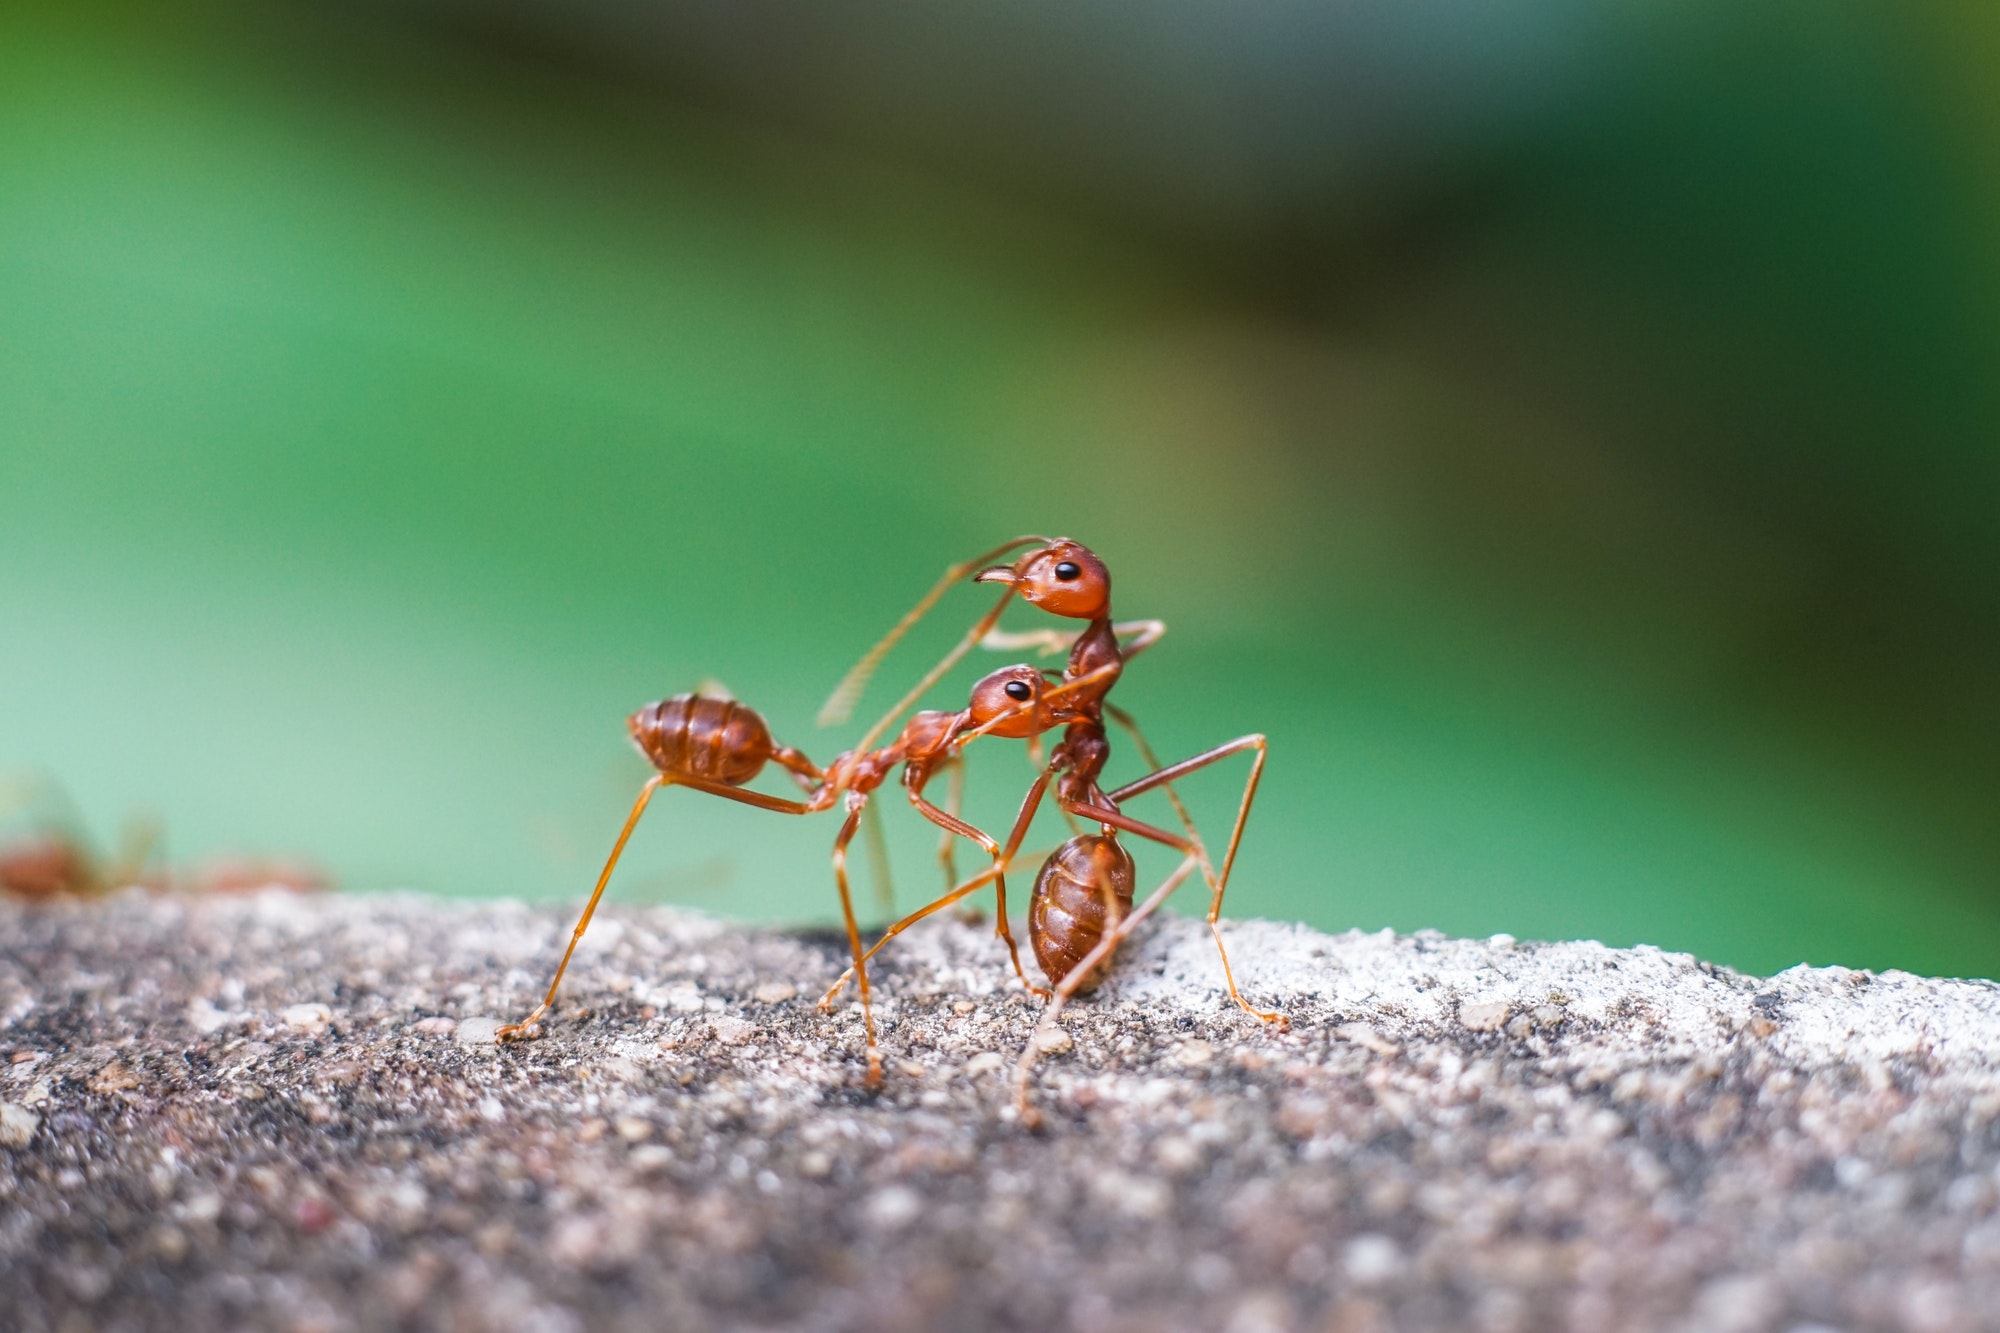 Fire Ants – Known for Being Mean